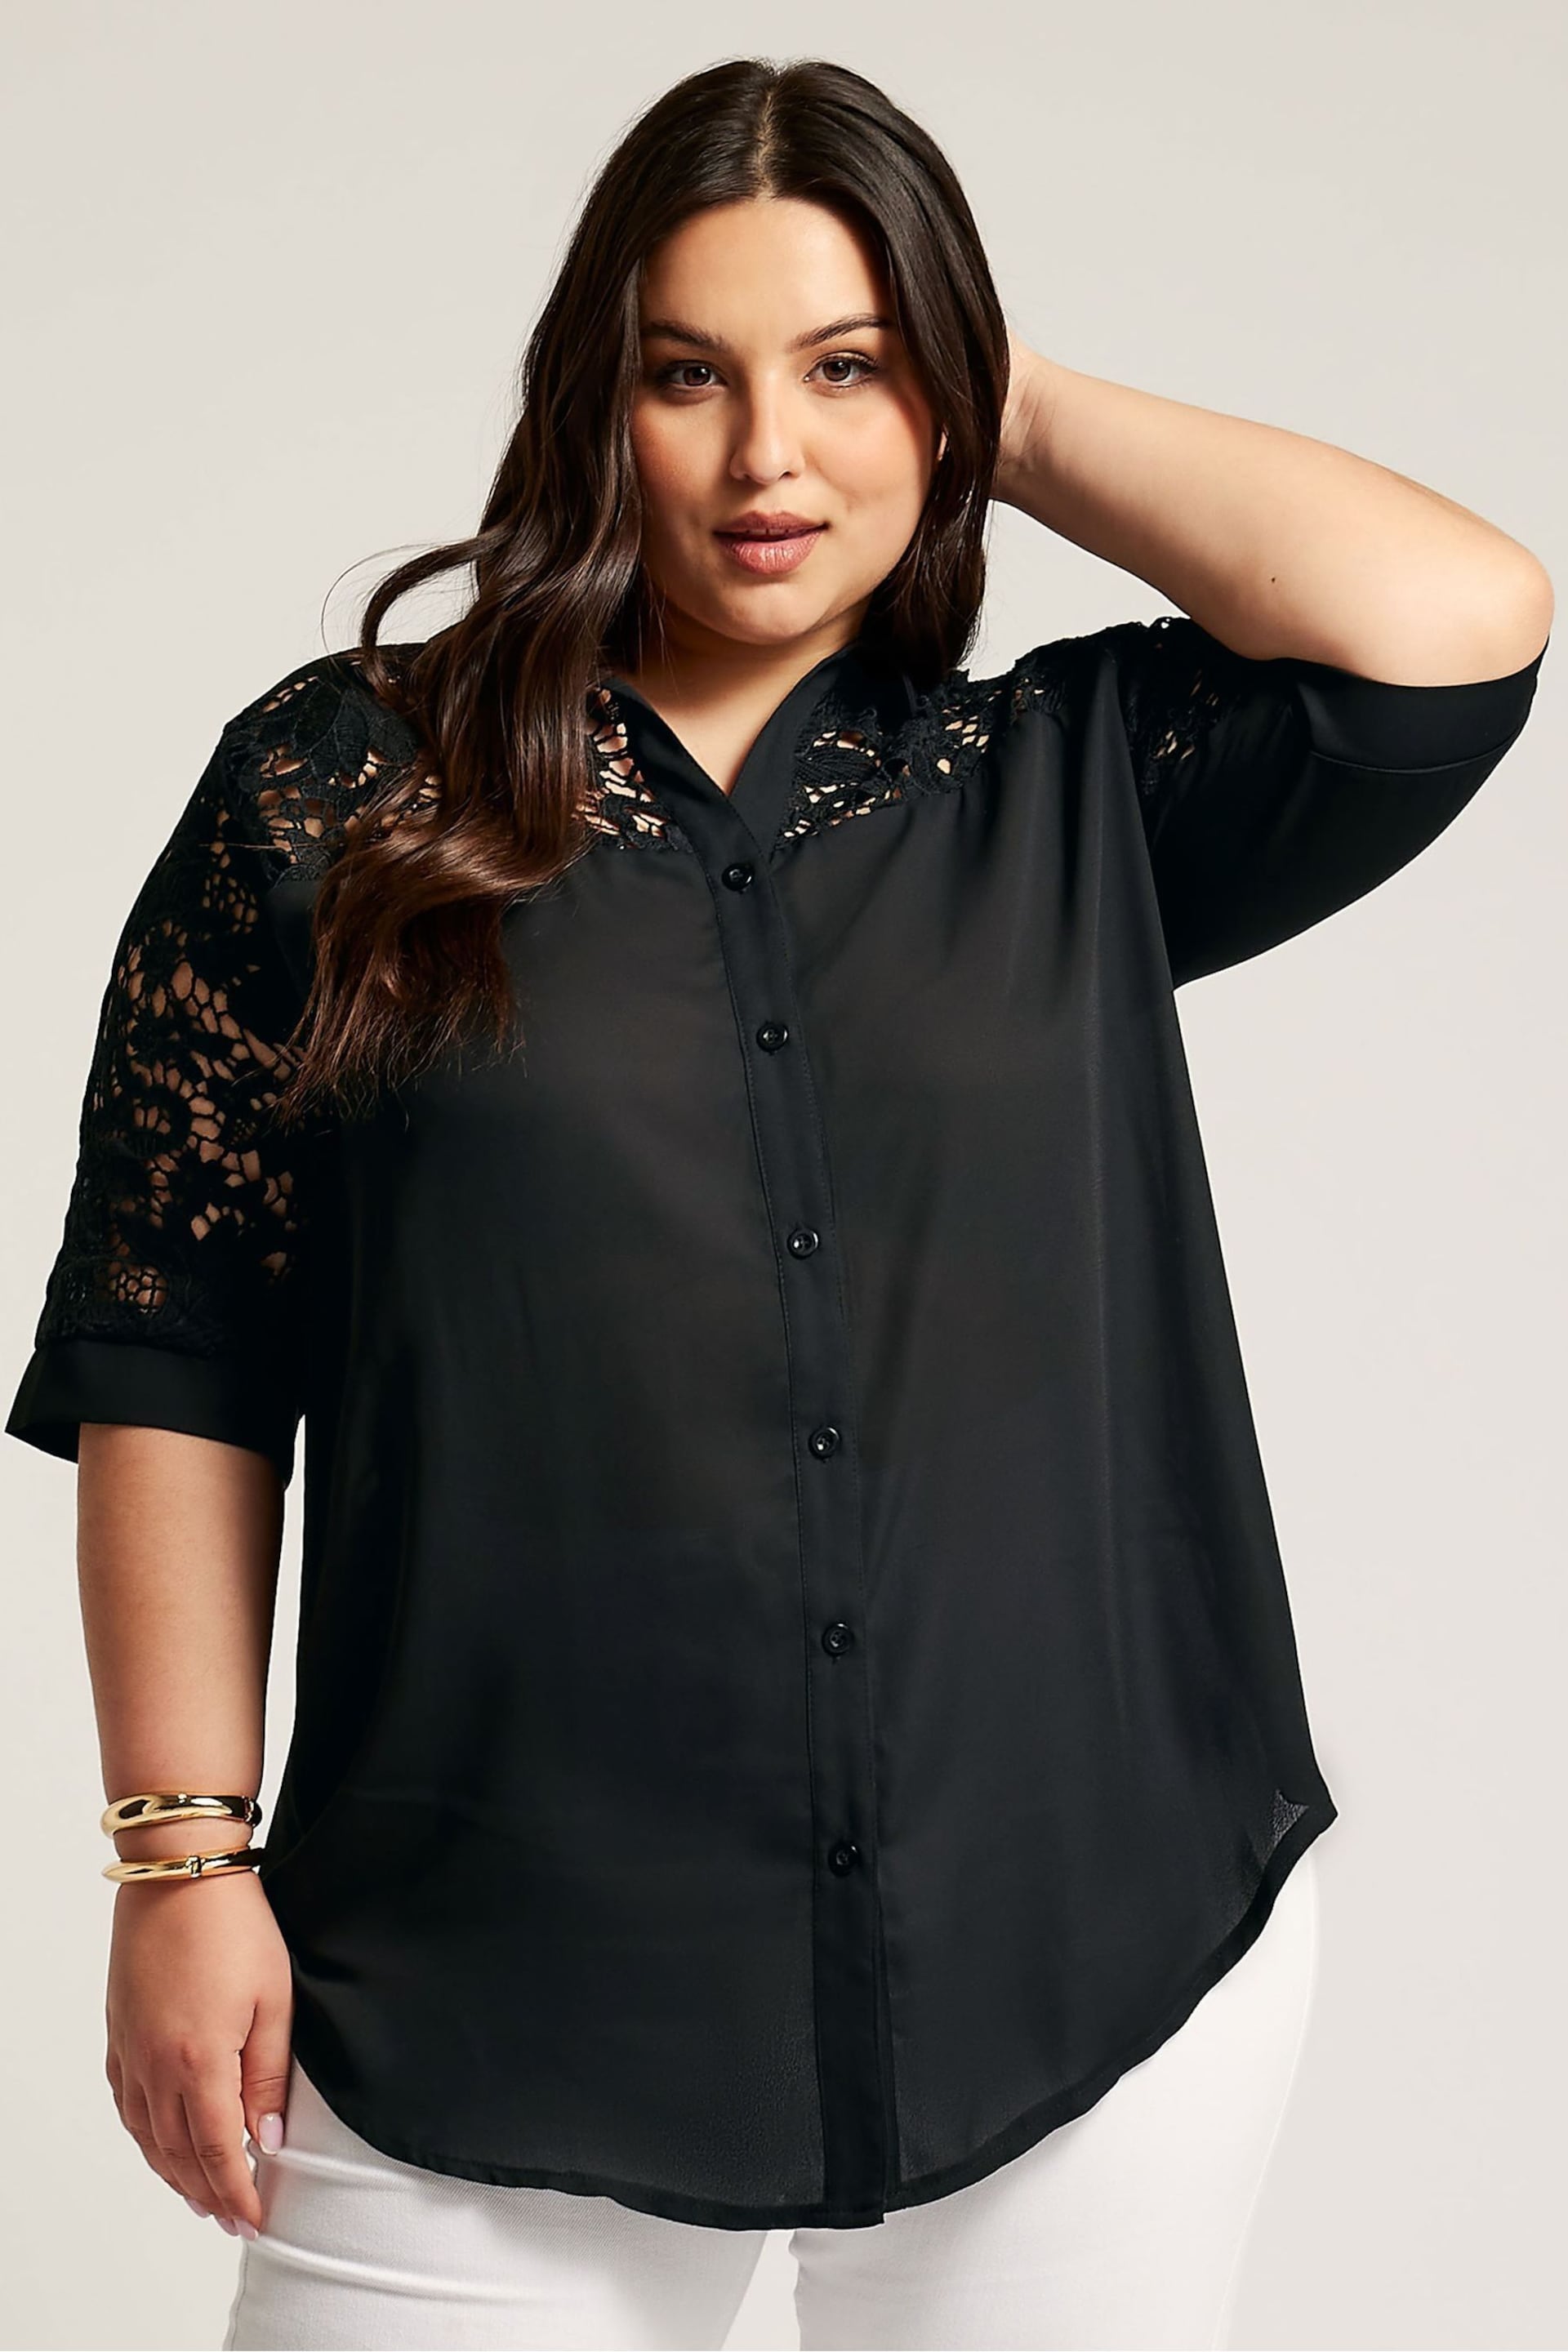 YOURS LONDON Curve Black Lace Sleeve Shirt - Image 1 of 2